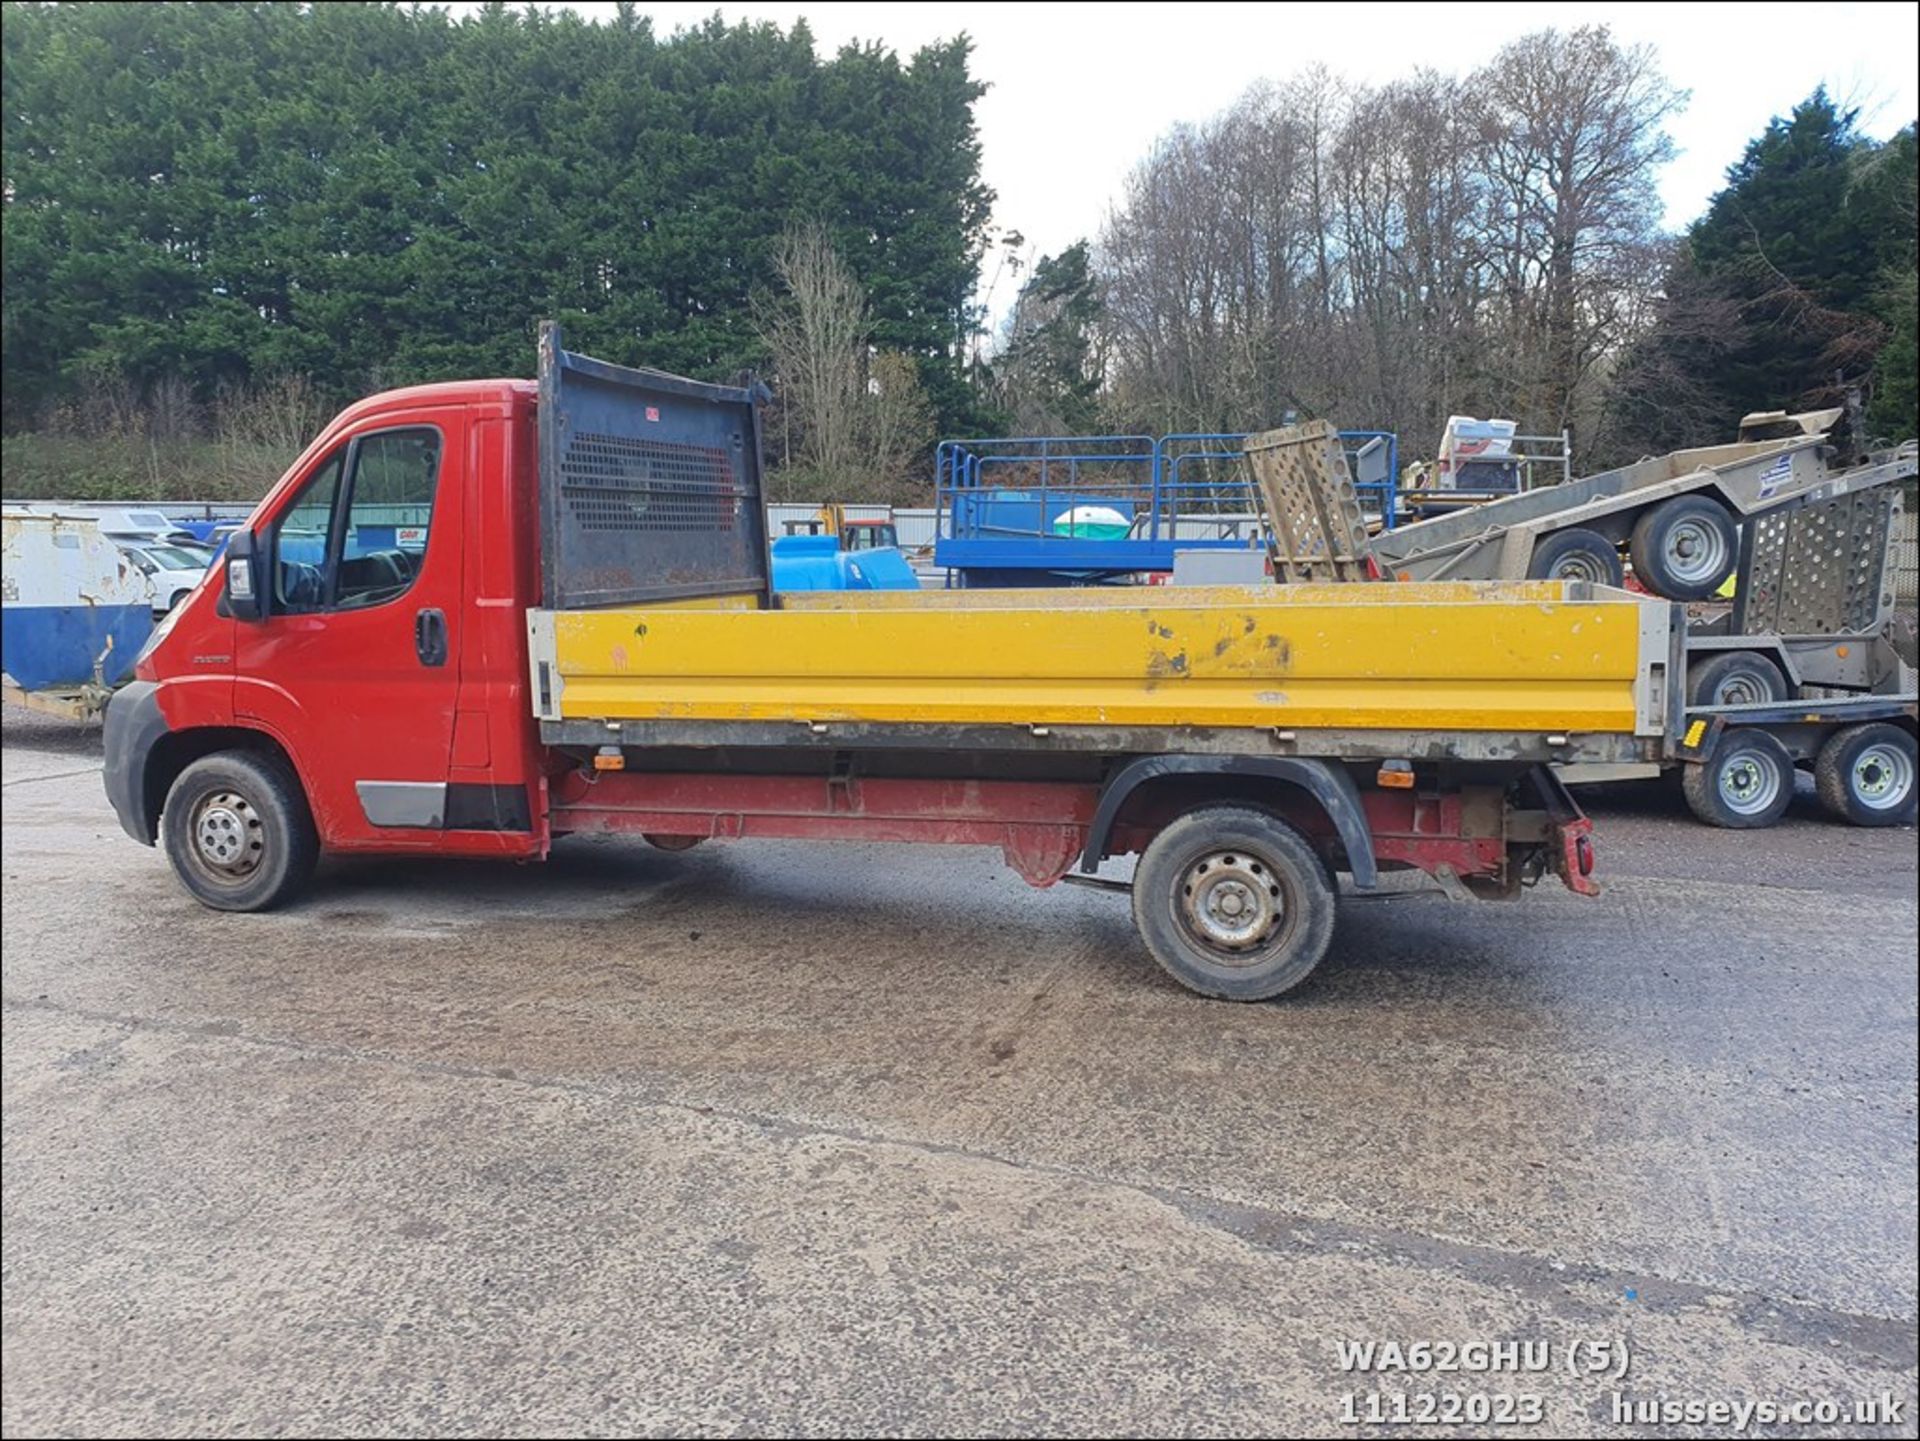 12/62 FIAT DUCATO 35 MULTIJET - 2287cc 2.dr Flat Bed (Red) - Image 6 of 45